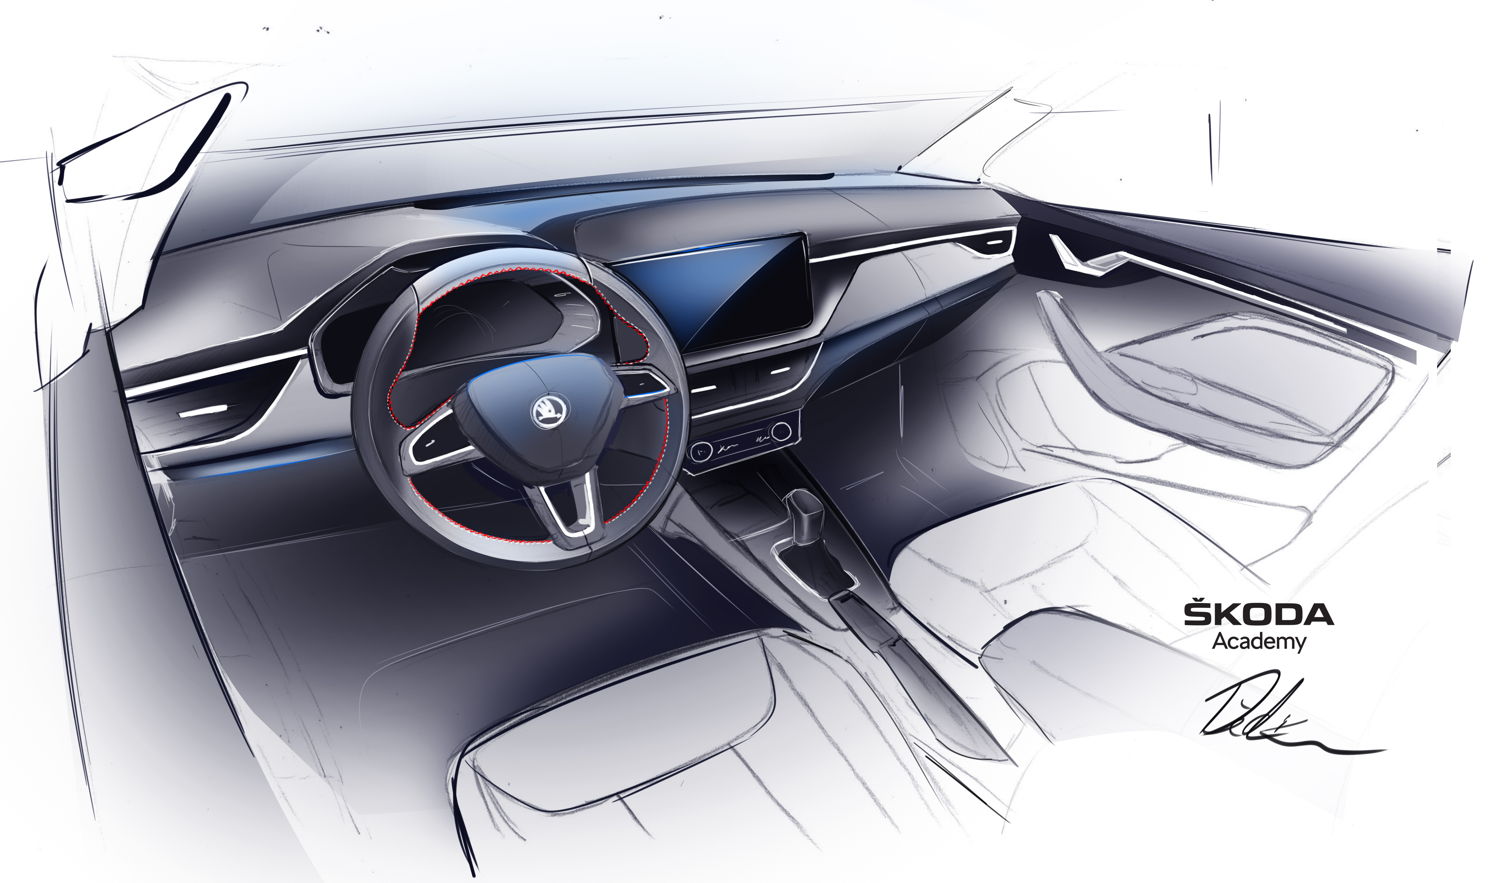 One of the first sketches by the ŠKODA vocational students
offers an insight into the seventh ŠKODA Student Car: an
emotive and dynamic spider version of the ŠKODA SCALA.